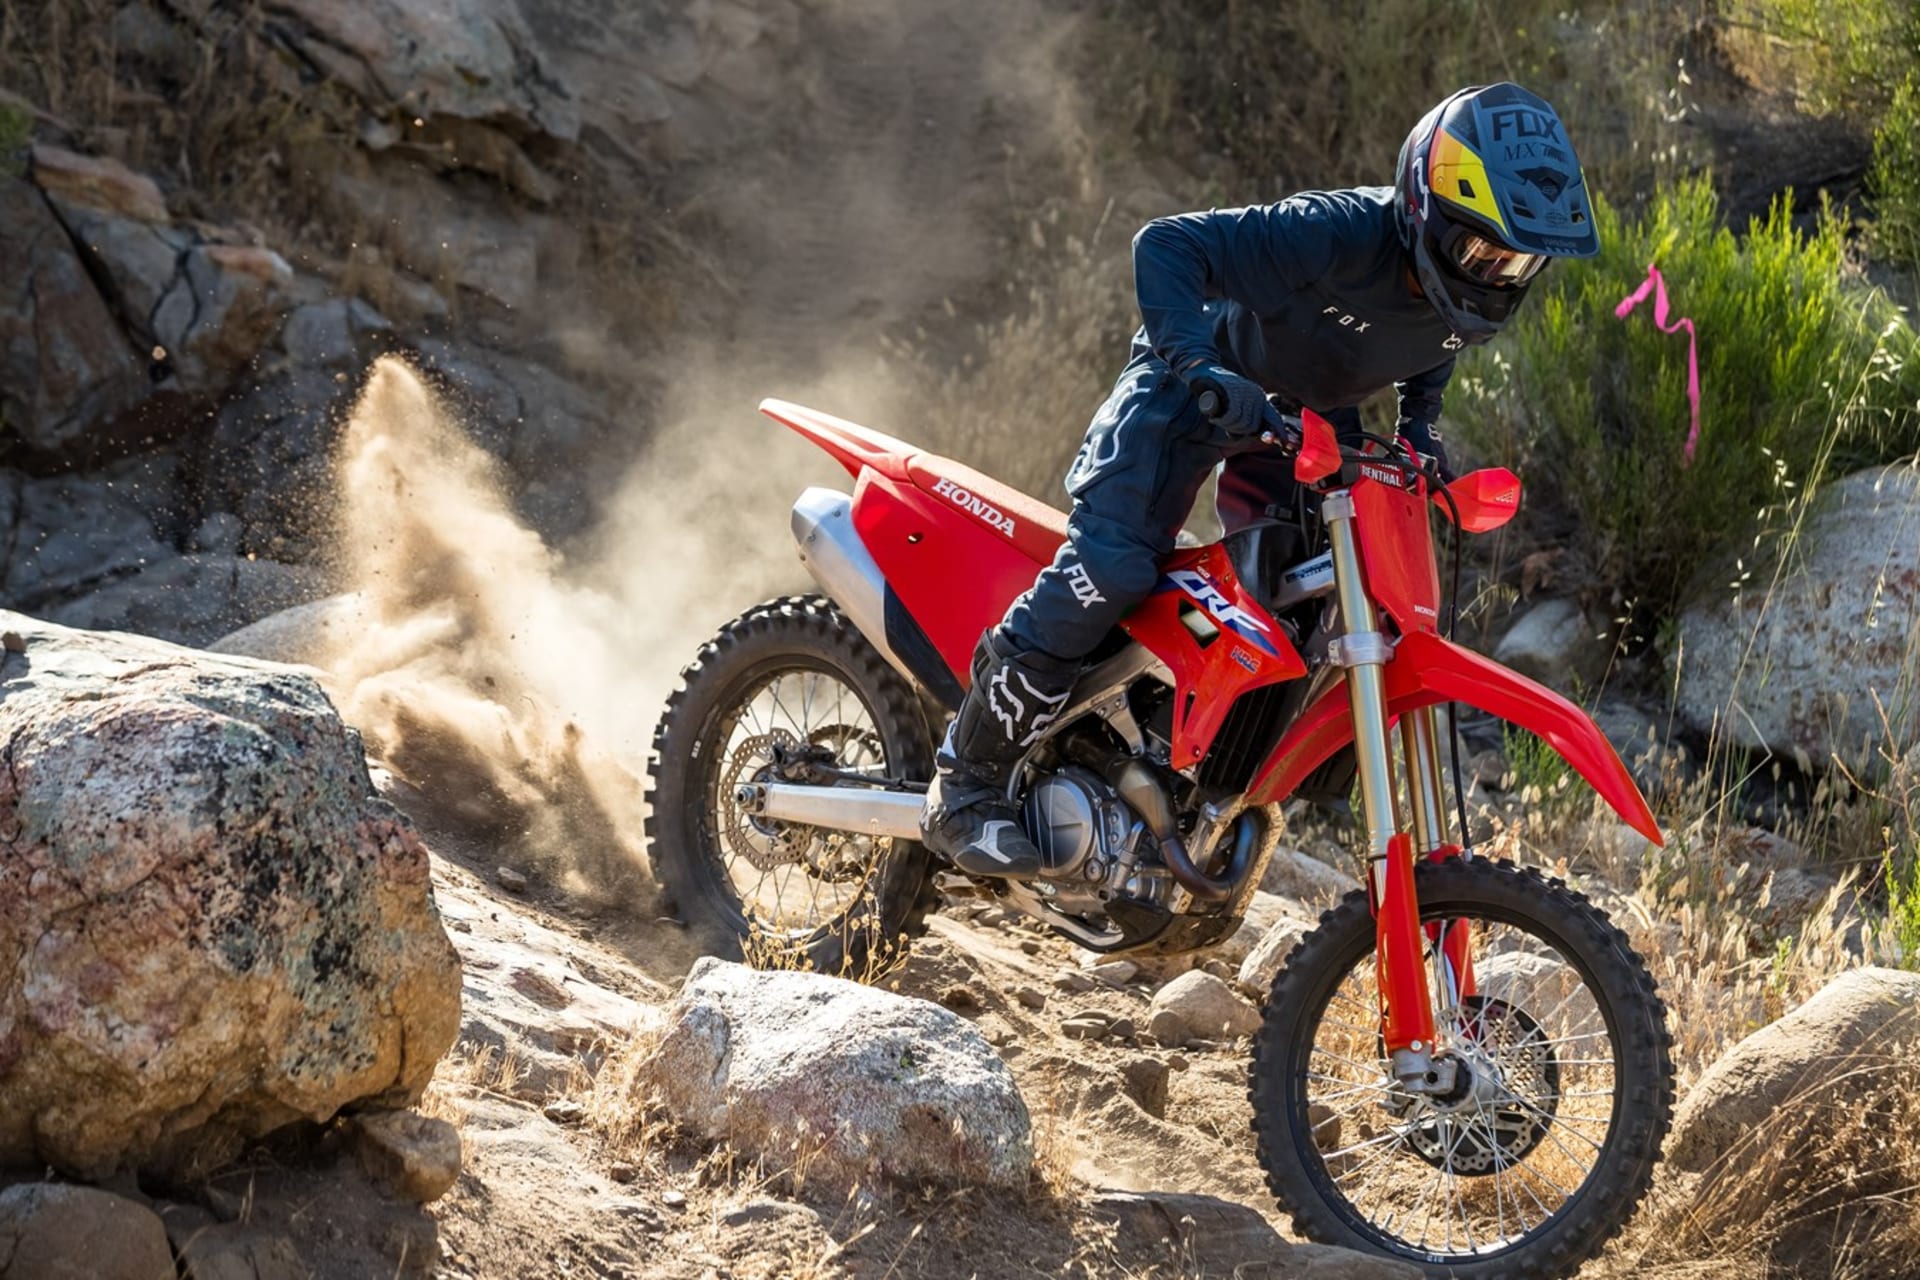 CRF450RX - Up To £1000 Lings Saving